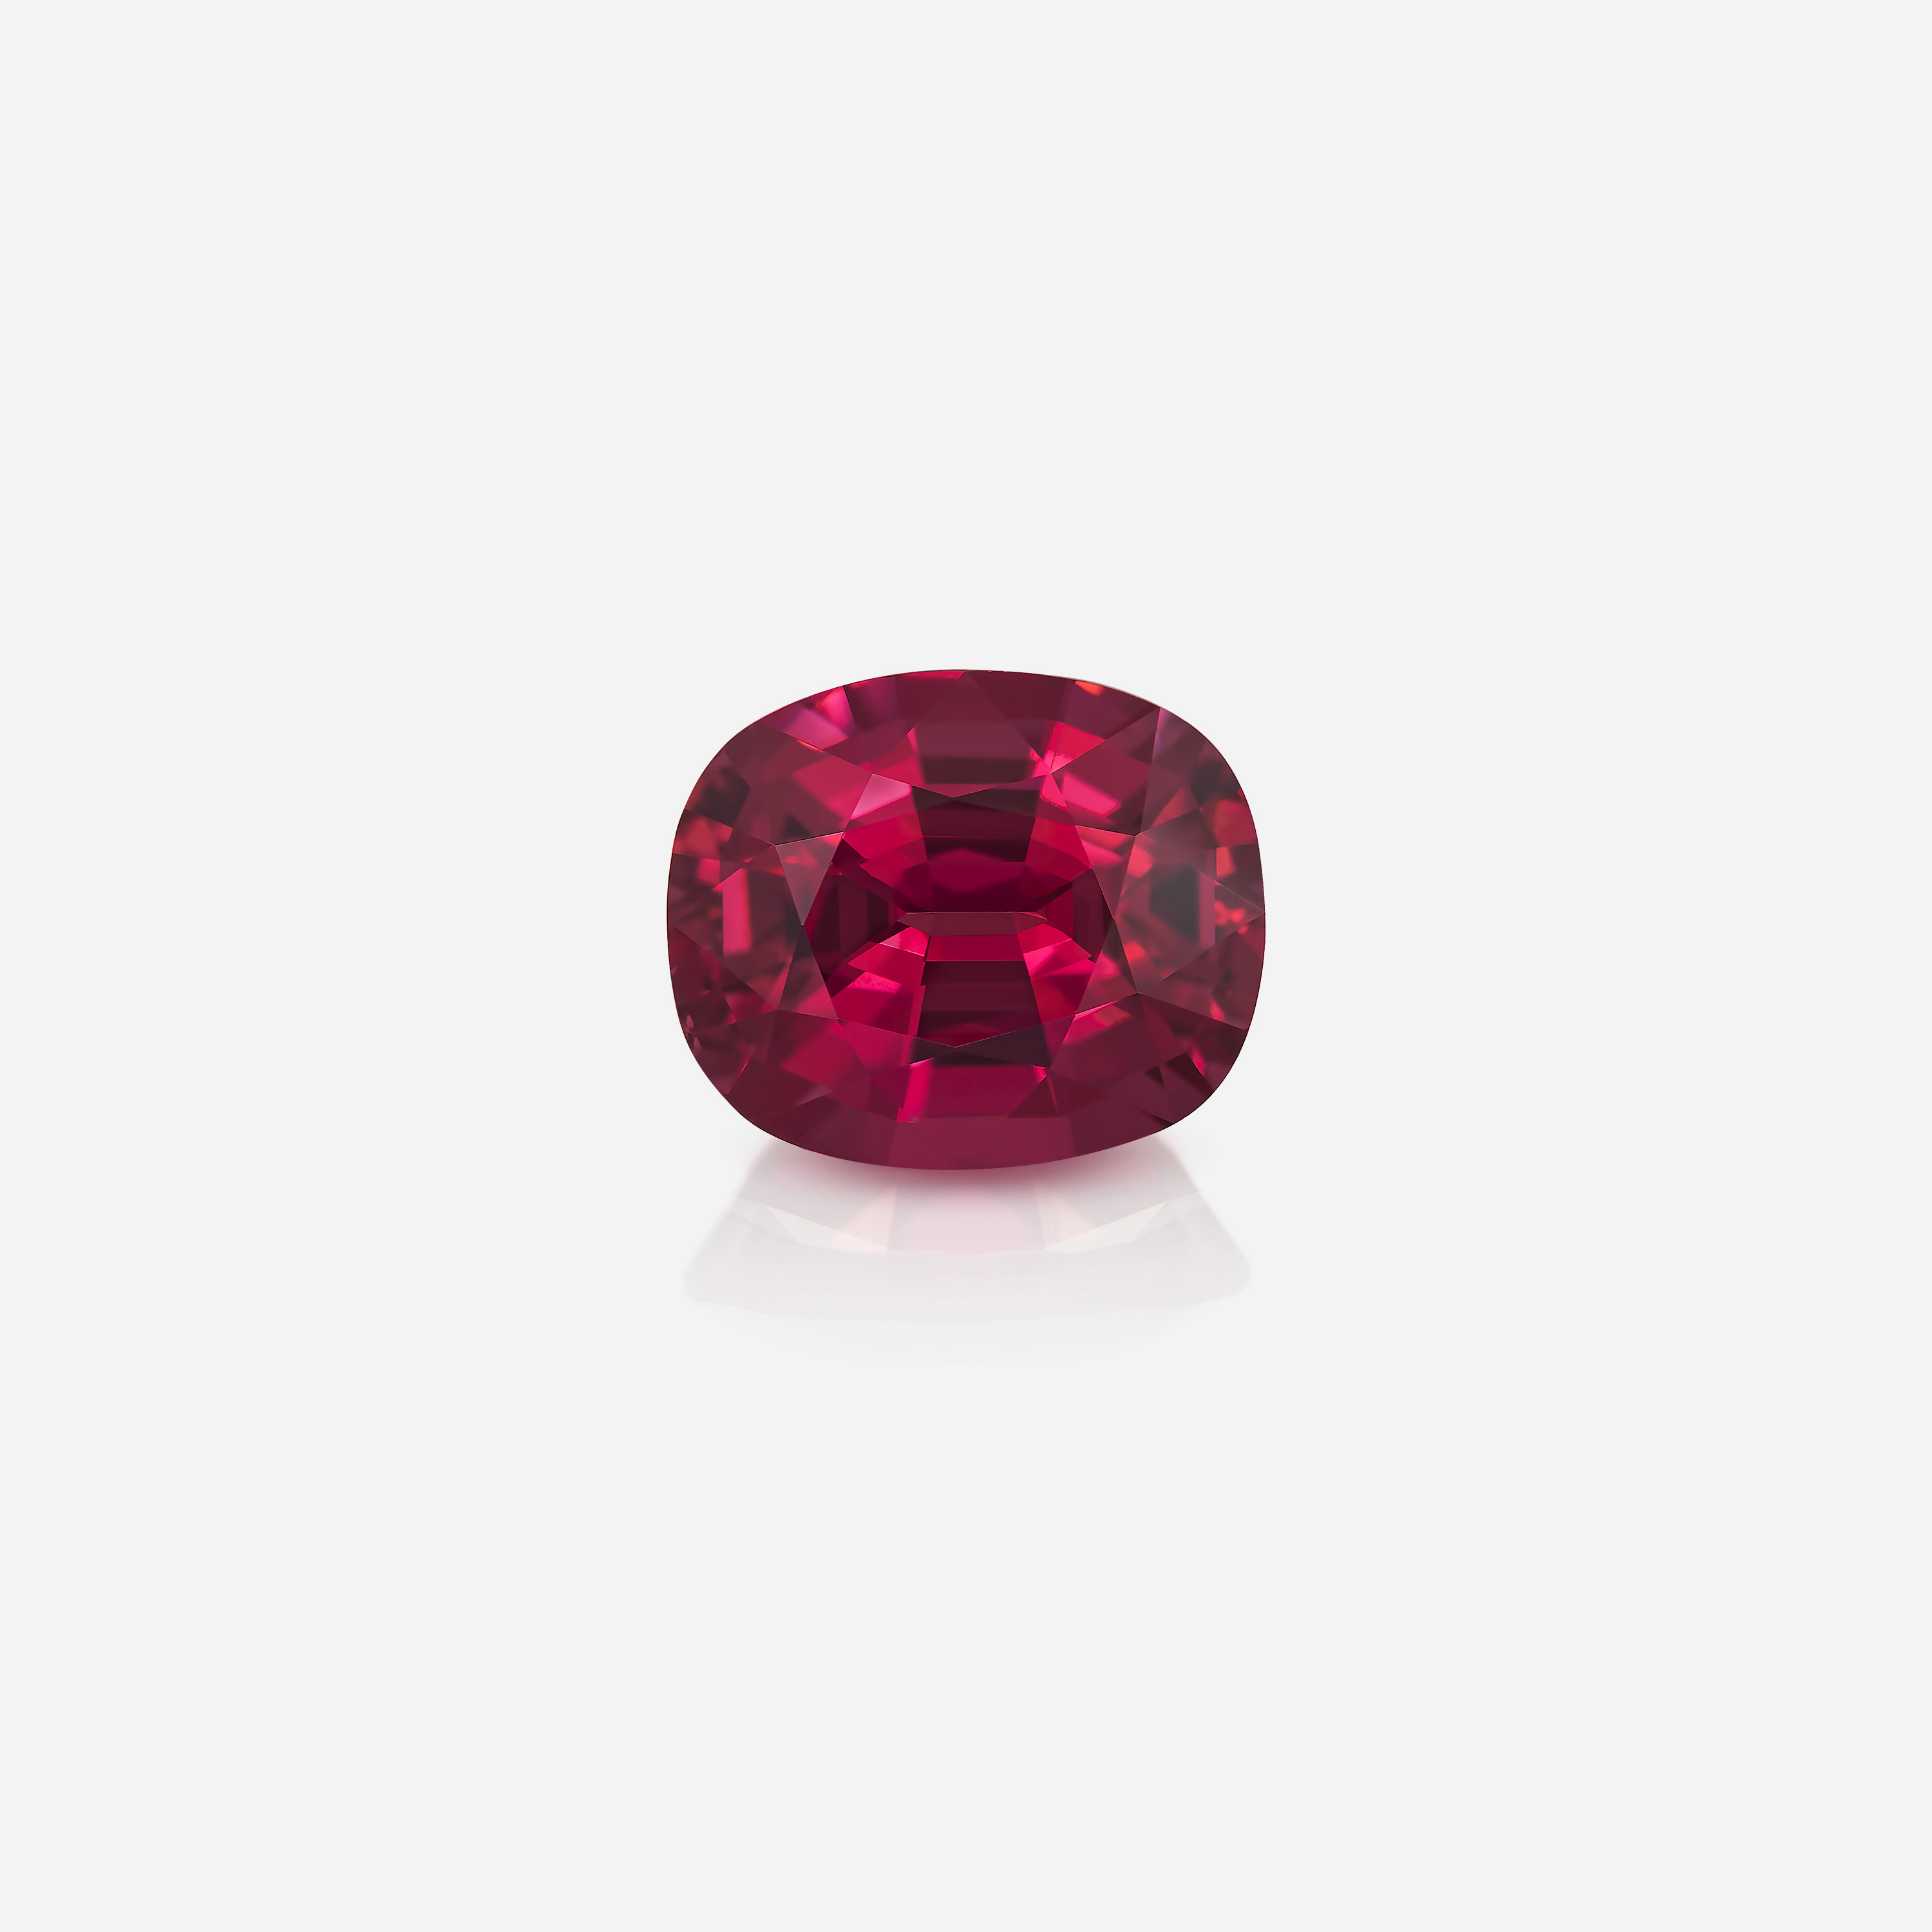 Red Spinel, Tanzania, 11ct